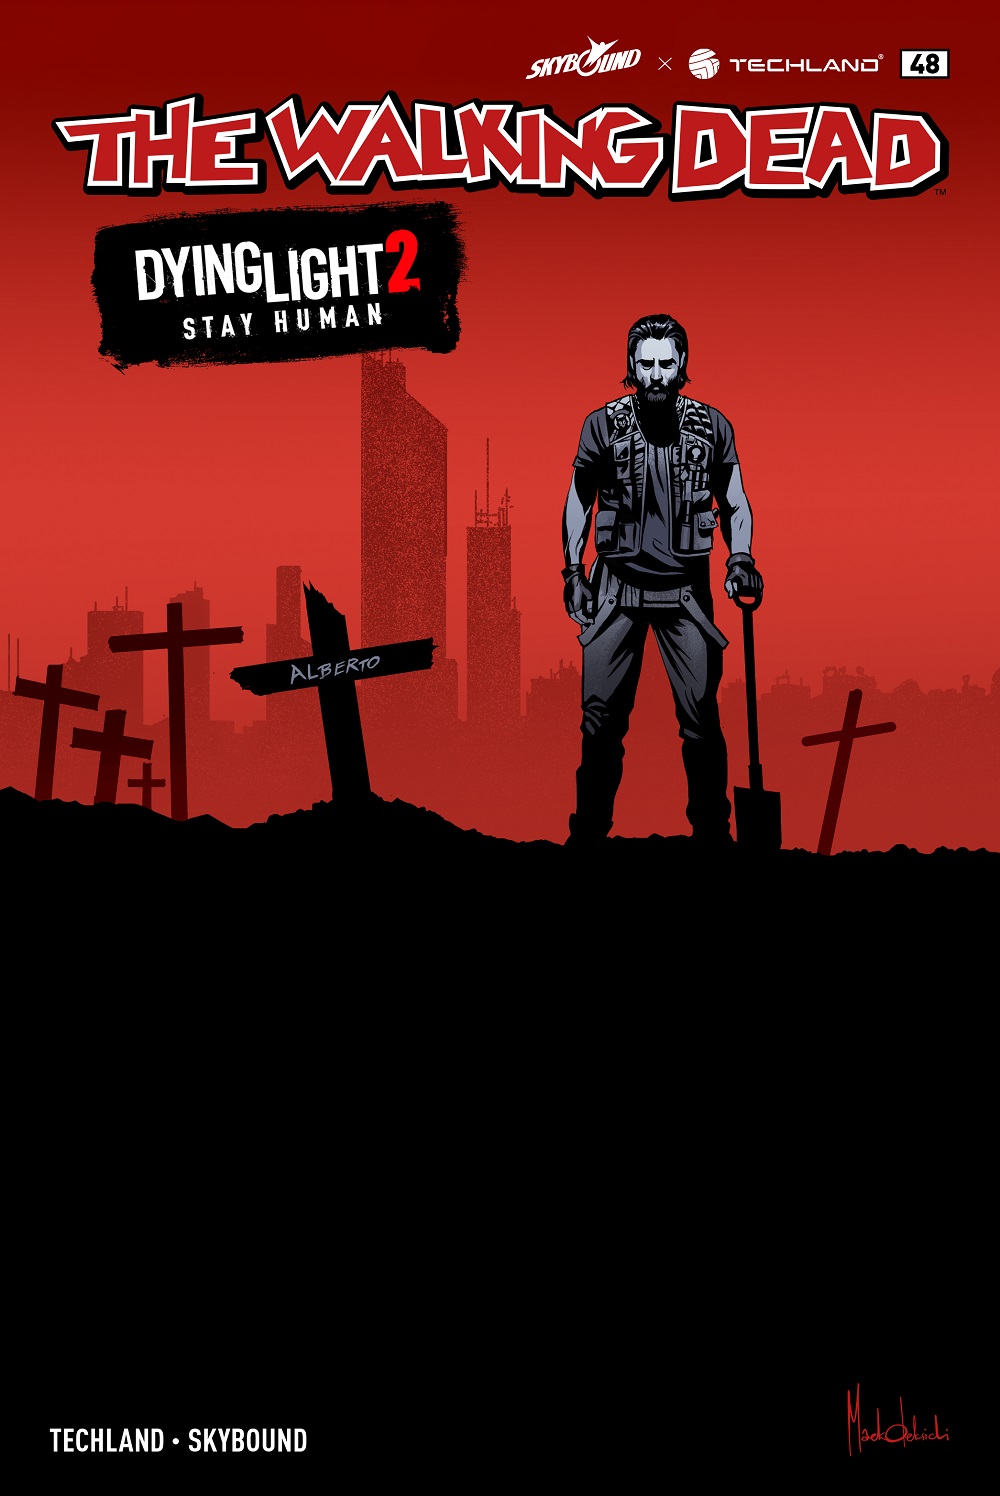 Pick Up Iconic Gear In The Dying Light 2 Stay Human x The Walking Dead Crossover Event